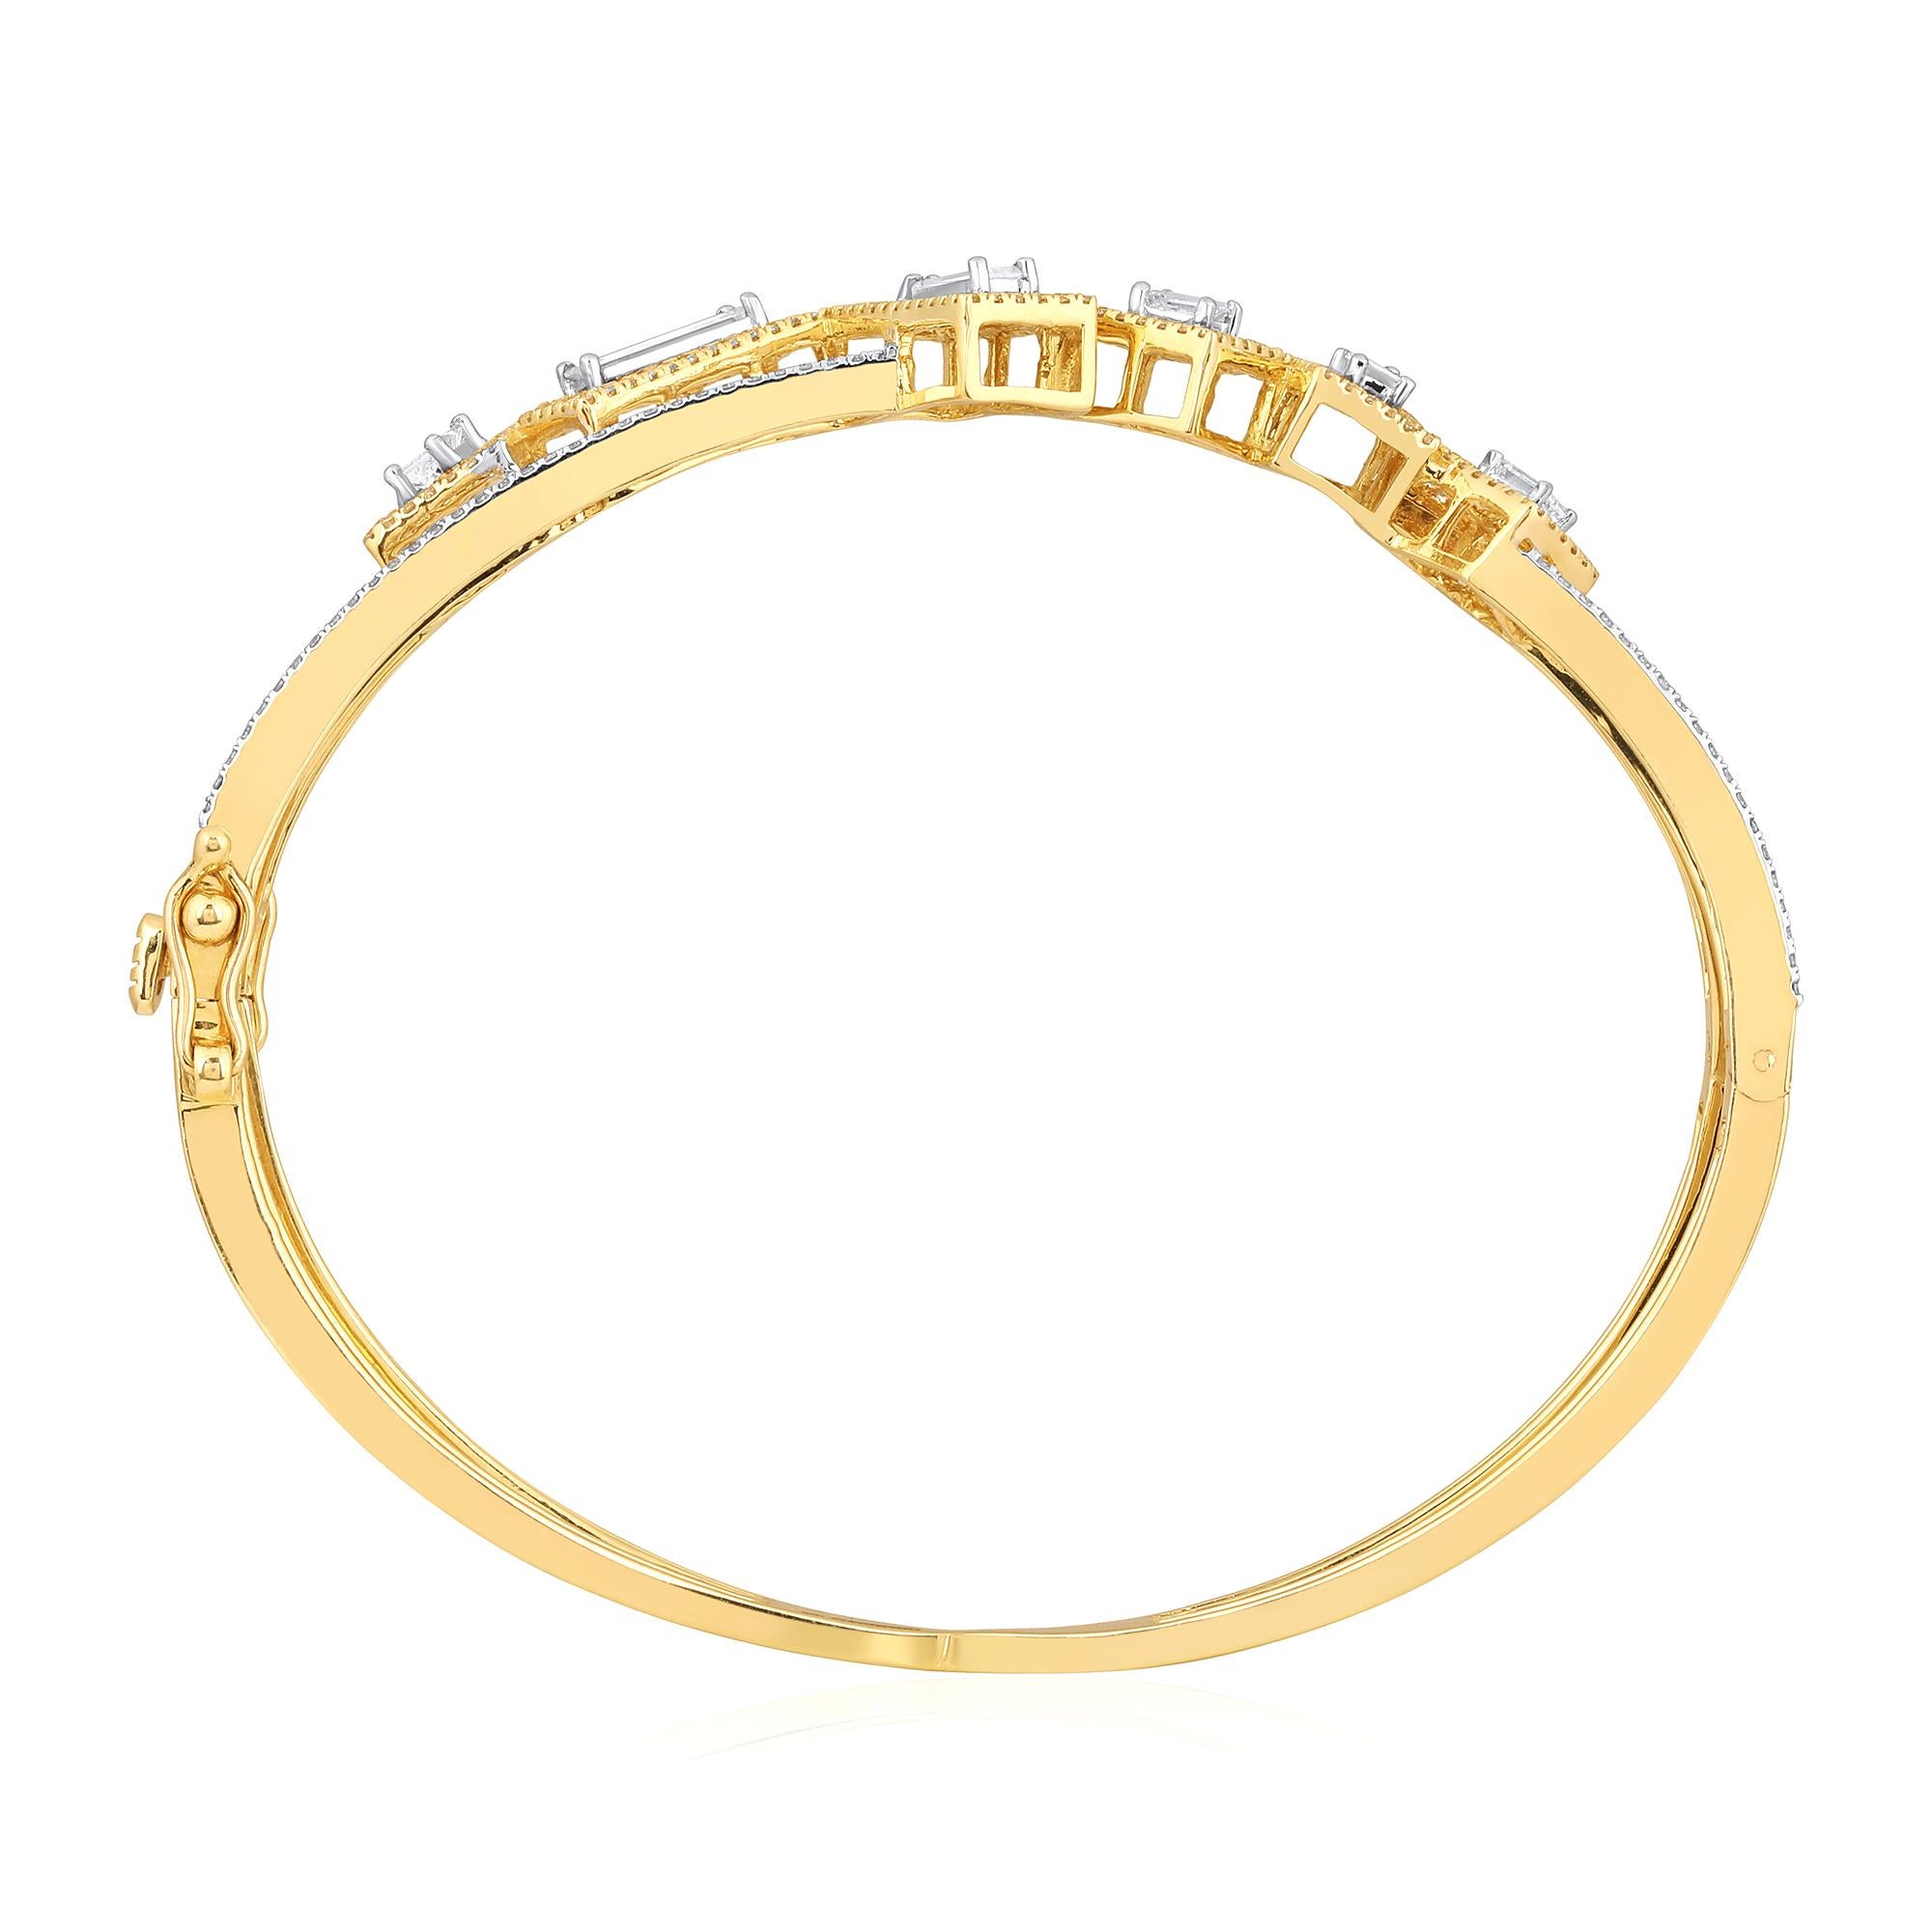 Crafted in 21.51 grams of 14-karat Yellow Gold, The Cosimo Bangle Bracelet contains 311 Stones of Round Diamonds with a total of 1.14-Carats in F-G Color and VVS-VS Clarity combined with 6 Stones of Baguette Diamonds with a total of 0.89-Carats in